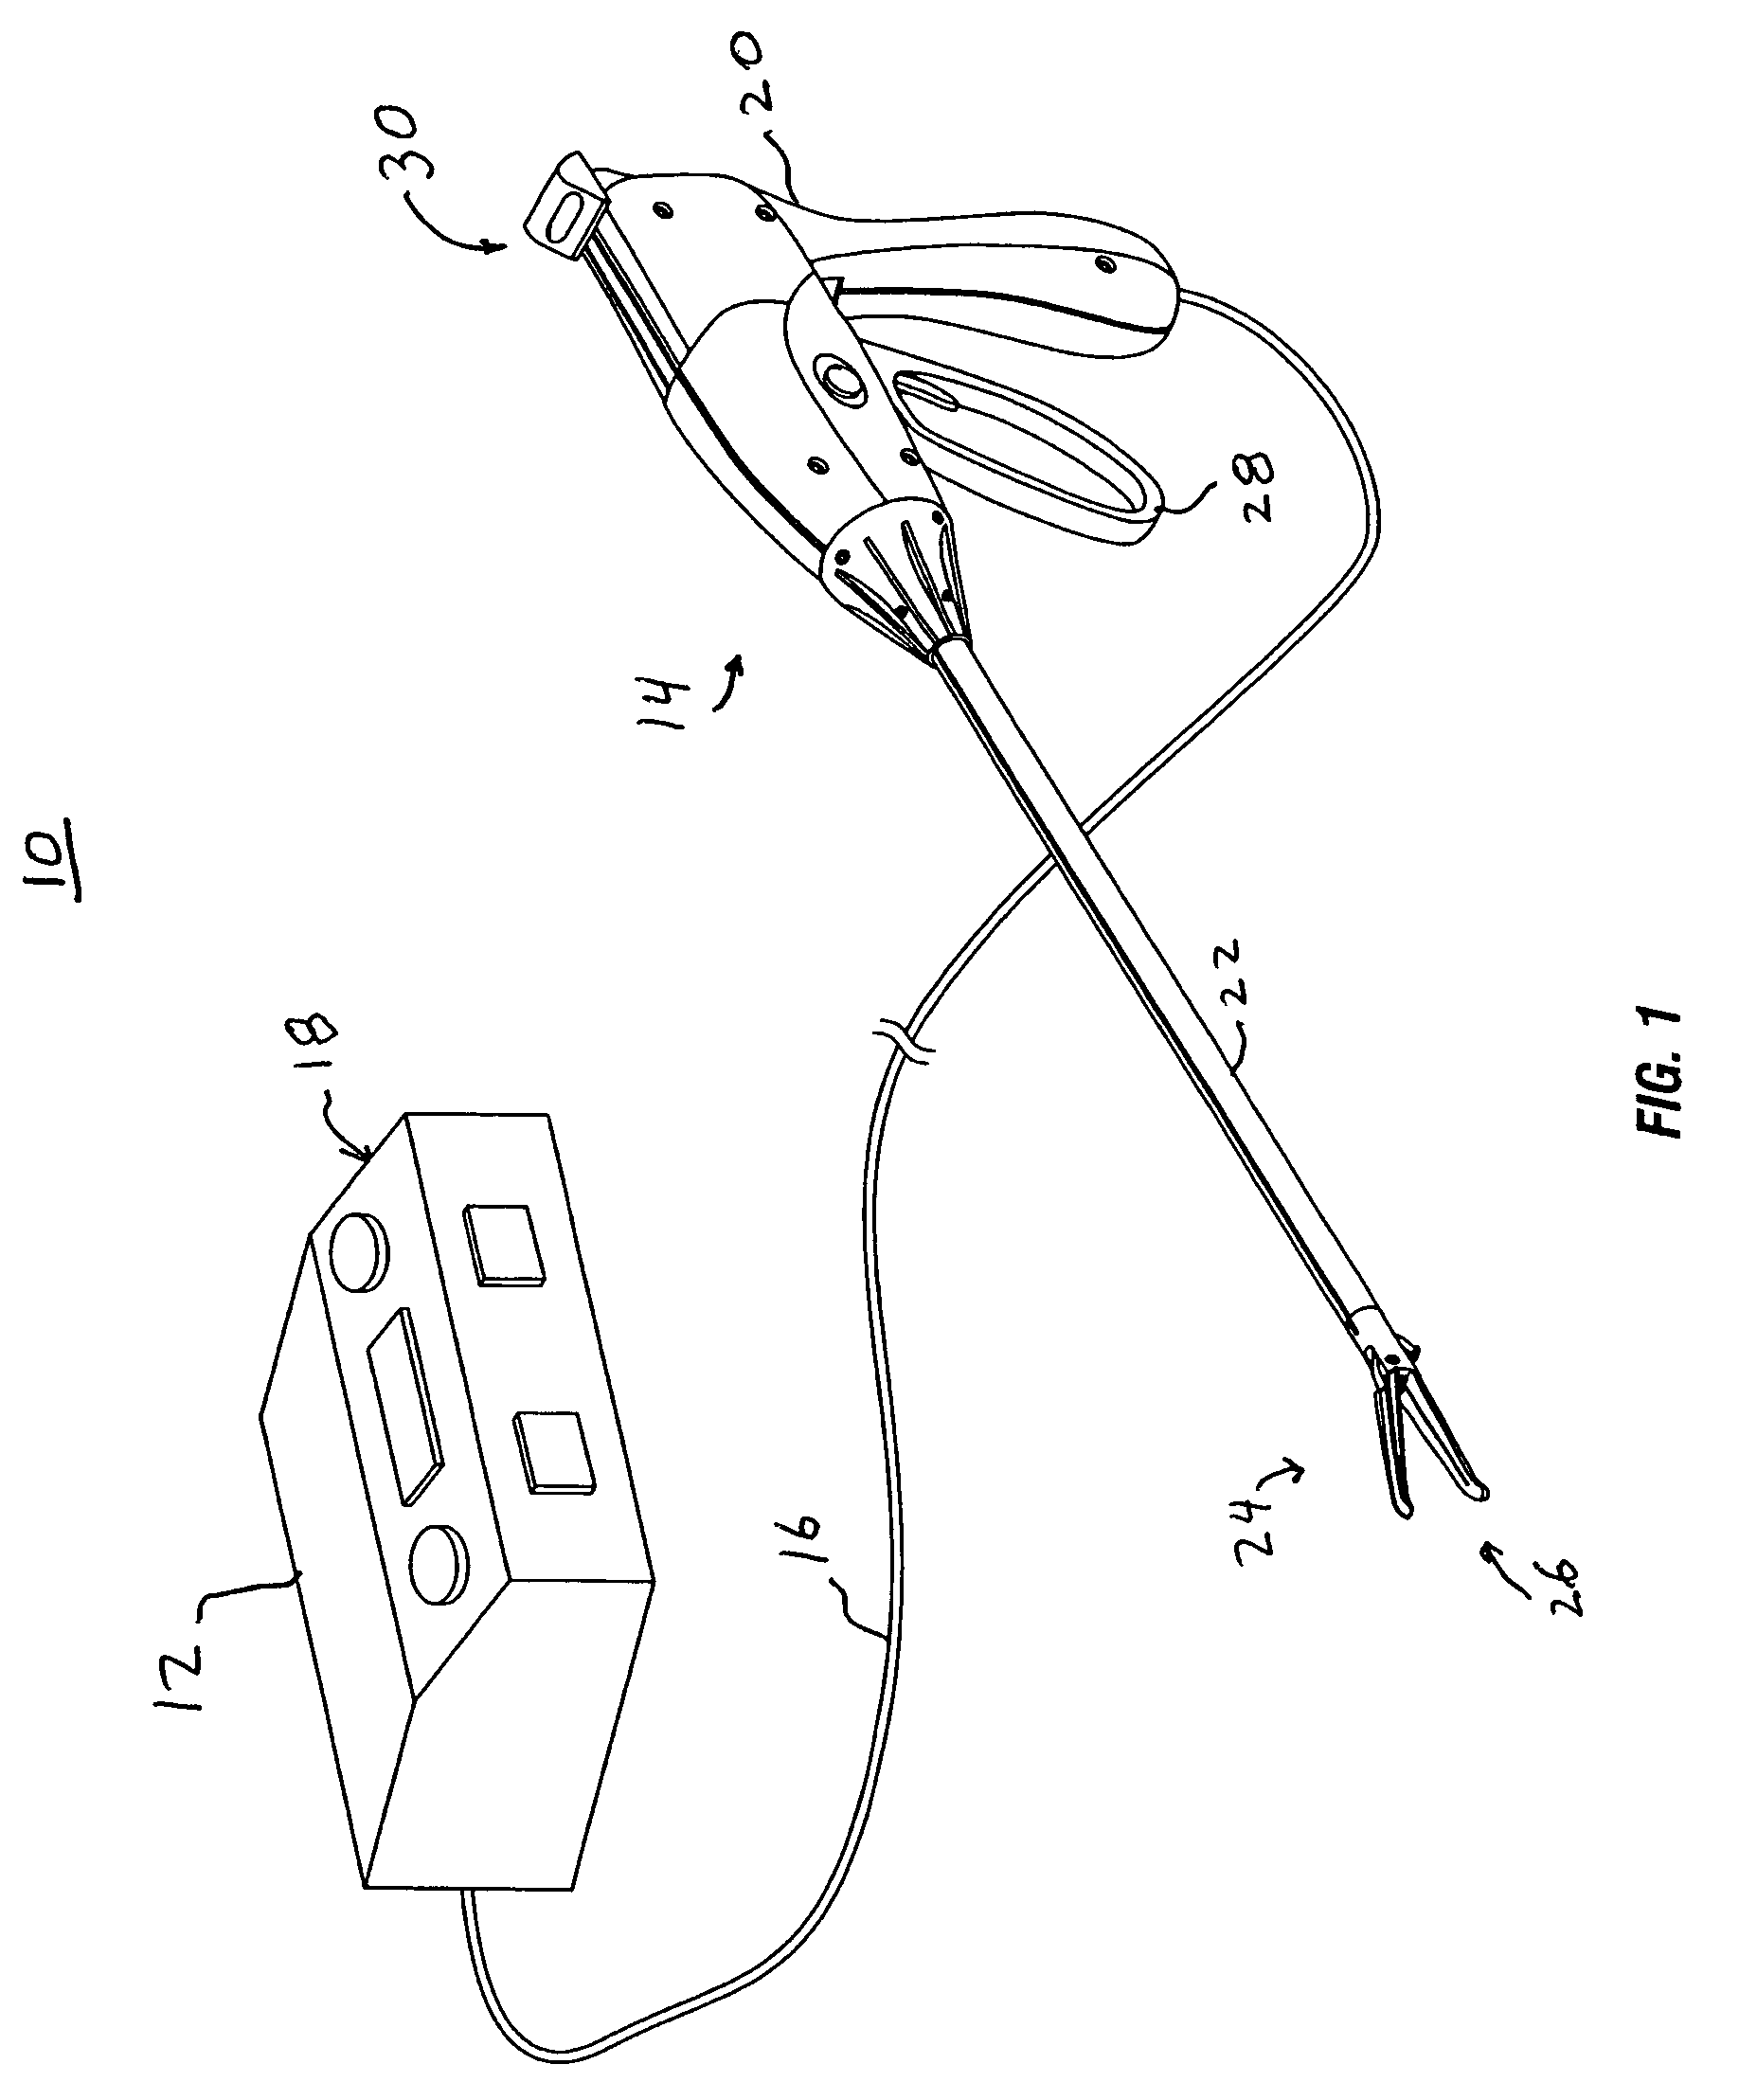 Switch mechanisms for safe activation of energy on an electrosurgical instrument